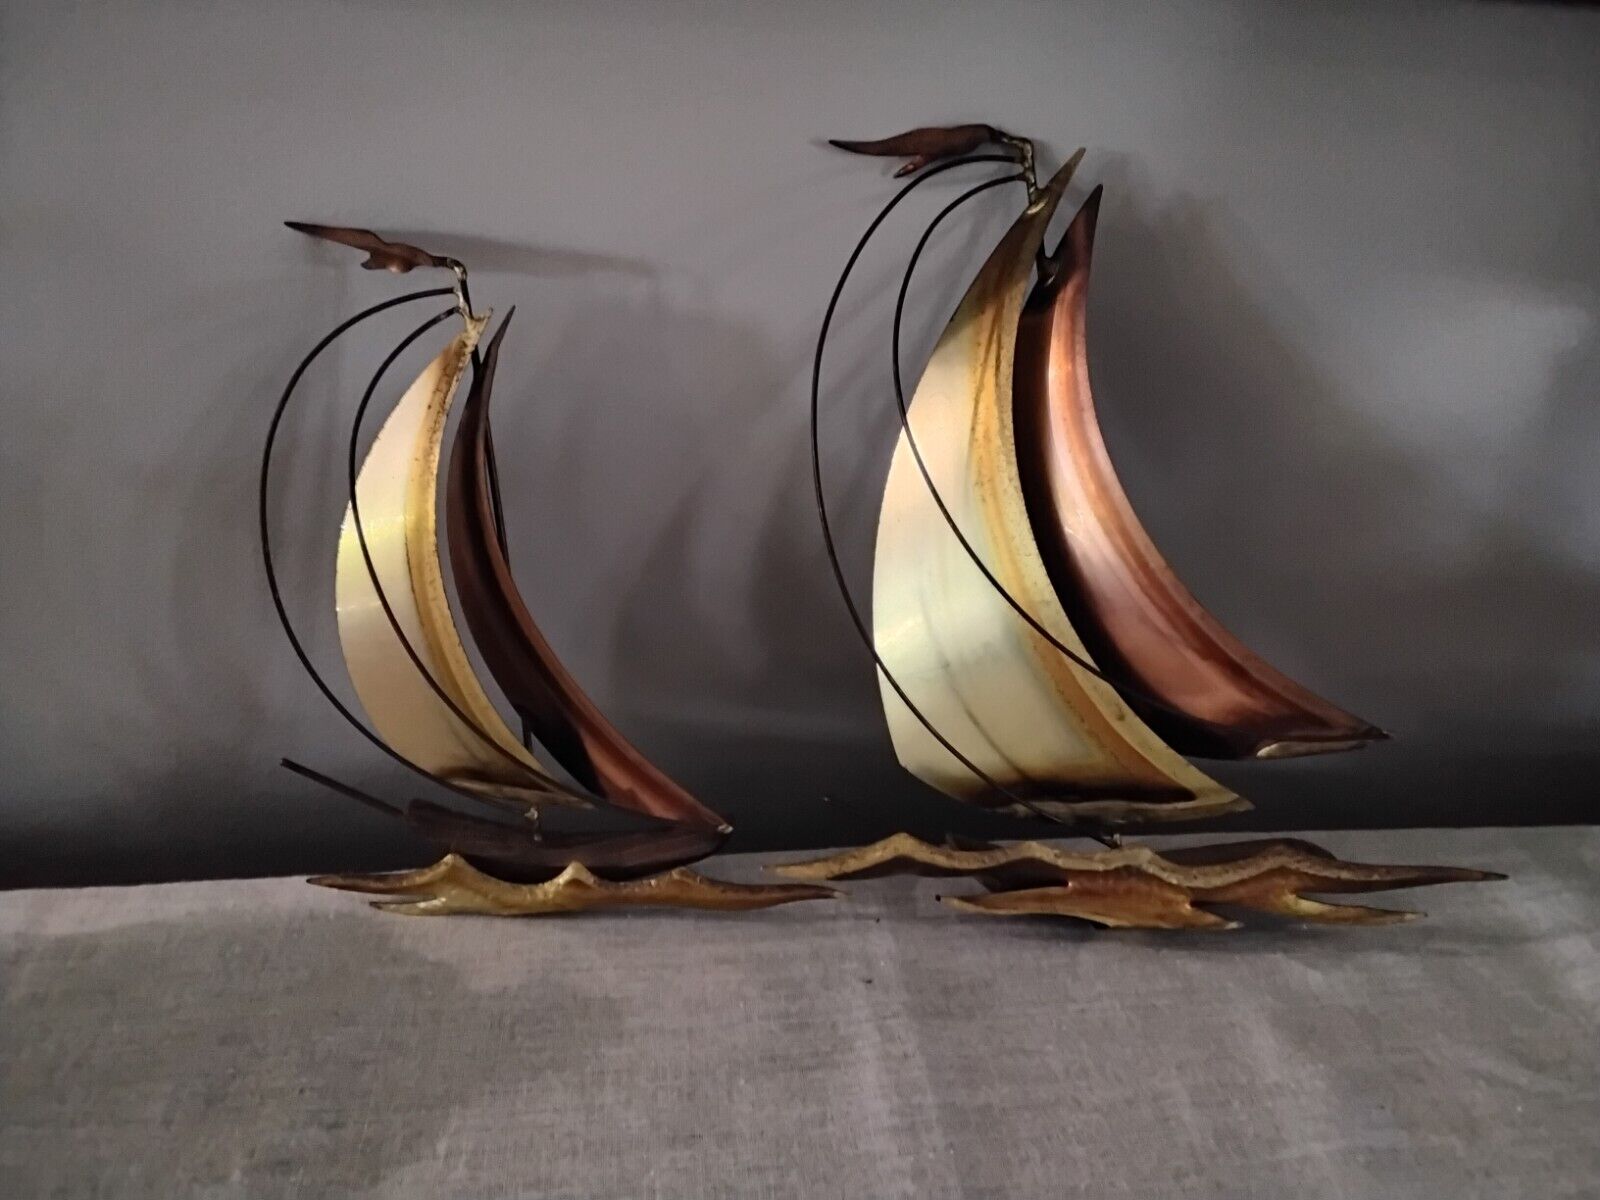 Vintage Mid-Century Modern Brass, Copper and Wood Sailboat Wall Hangings (2)